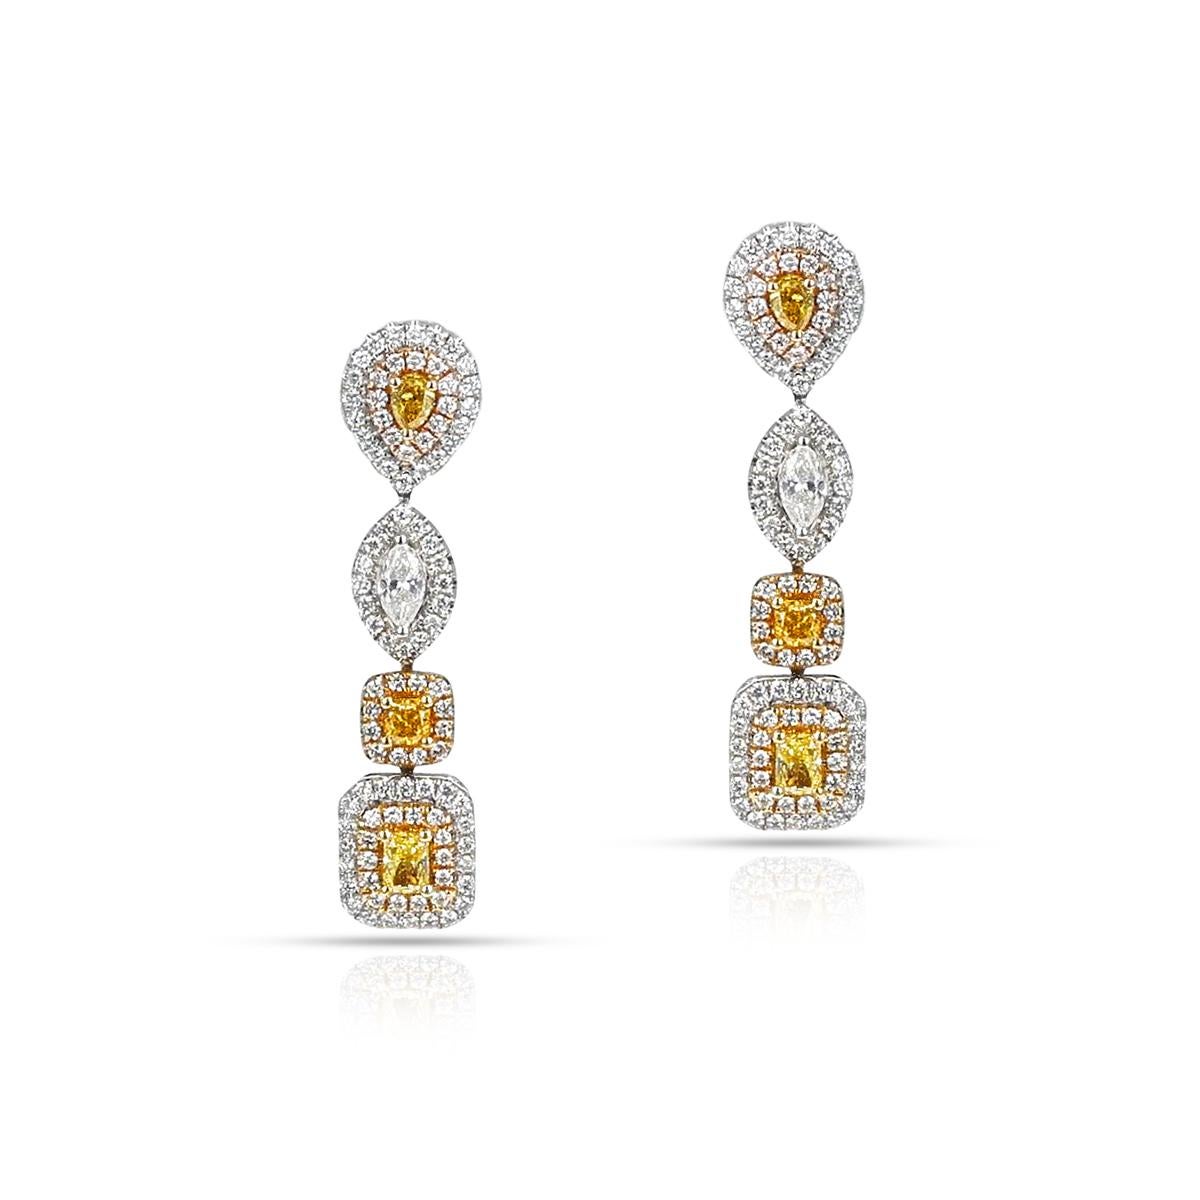 A Tri-Tone Multi-Color Mixed-Shape Diamond Dangling Earrings made in 18k yellow gold. The total diamond weight is appx. 1.72 carats. The length of the earring is 1.25 inches. The total weight is 8.49 grams. 